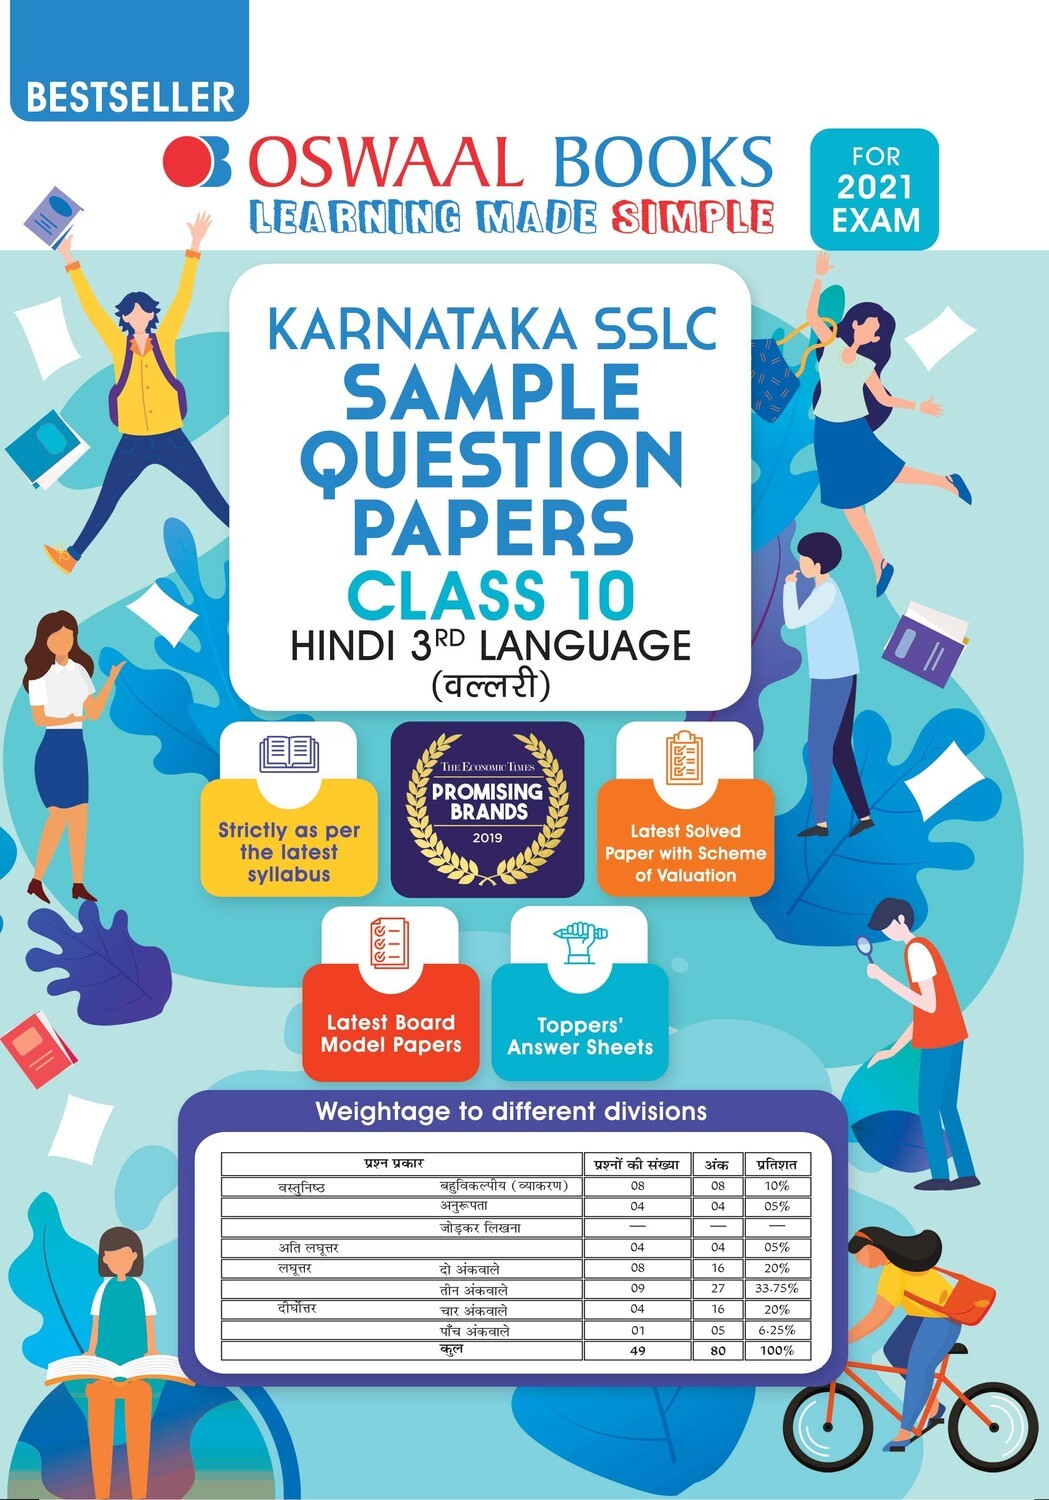 Buy e-book: Oswaal Karnataka SSLC Sample Question Papers Class 10 Hindi 3rd Language Book (For 2021 Exam)